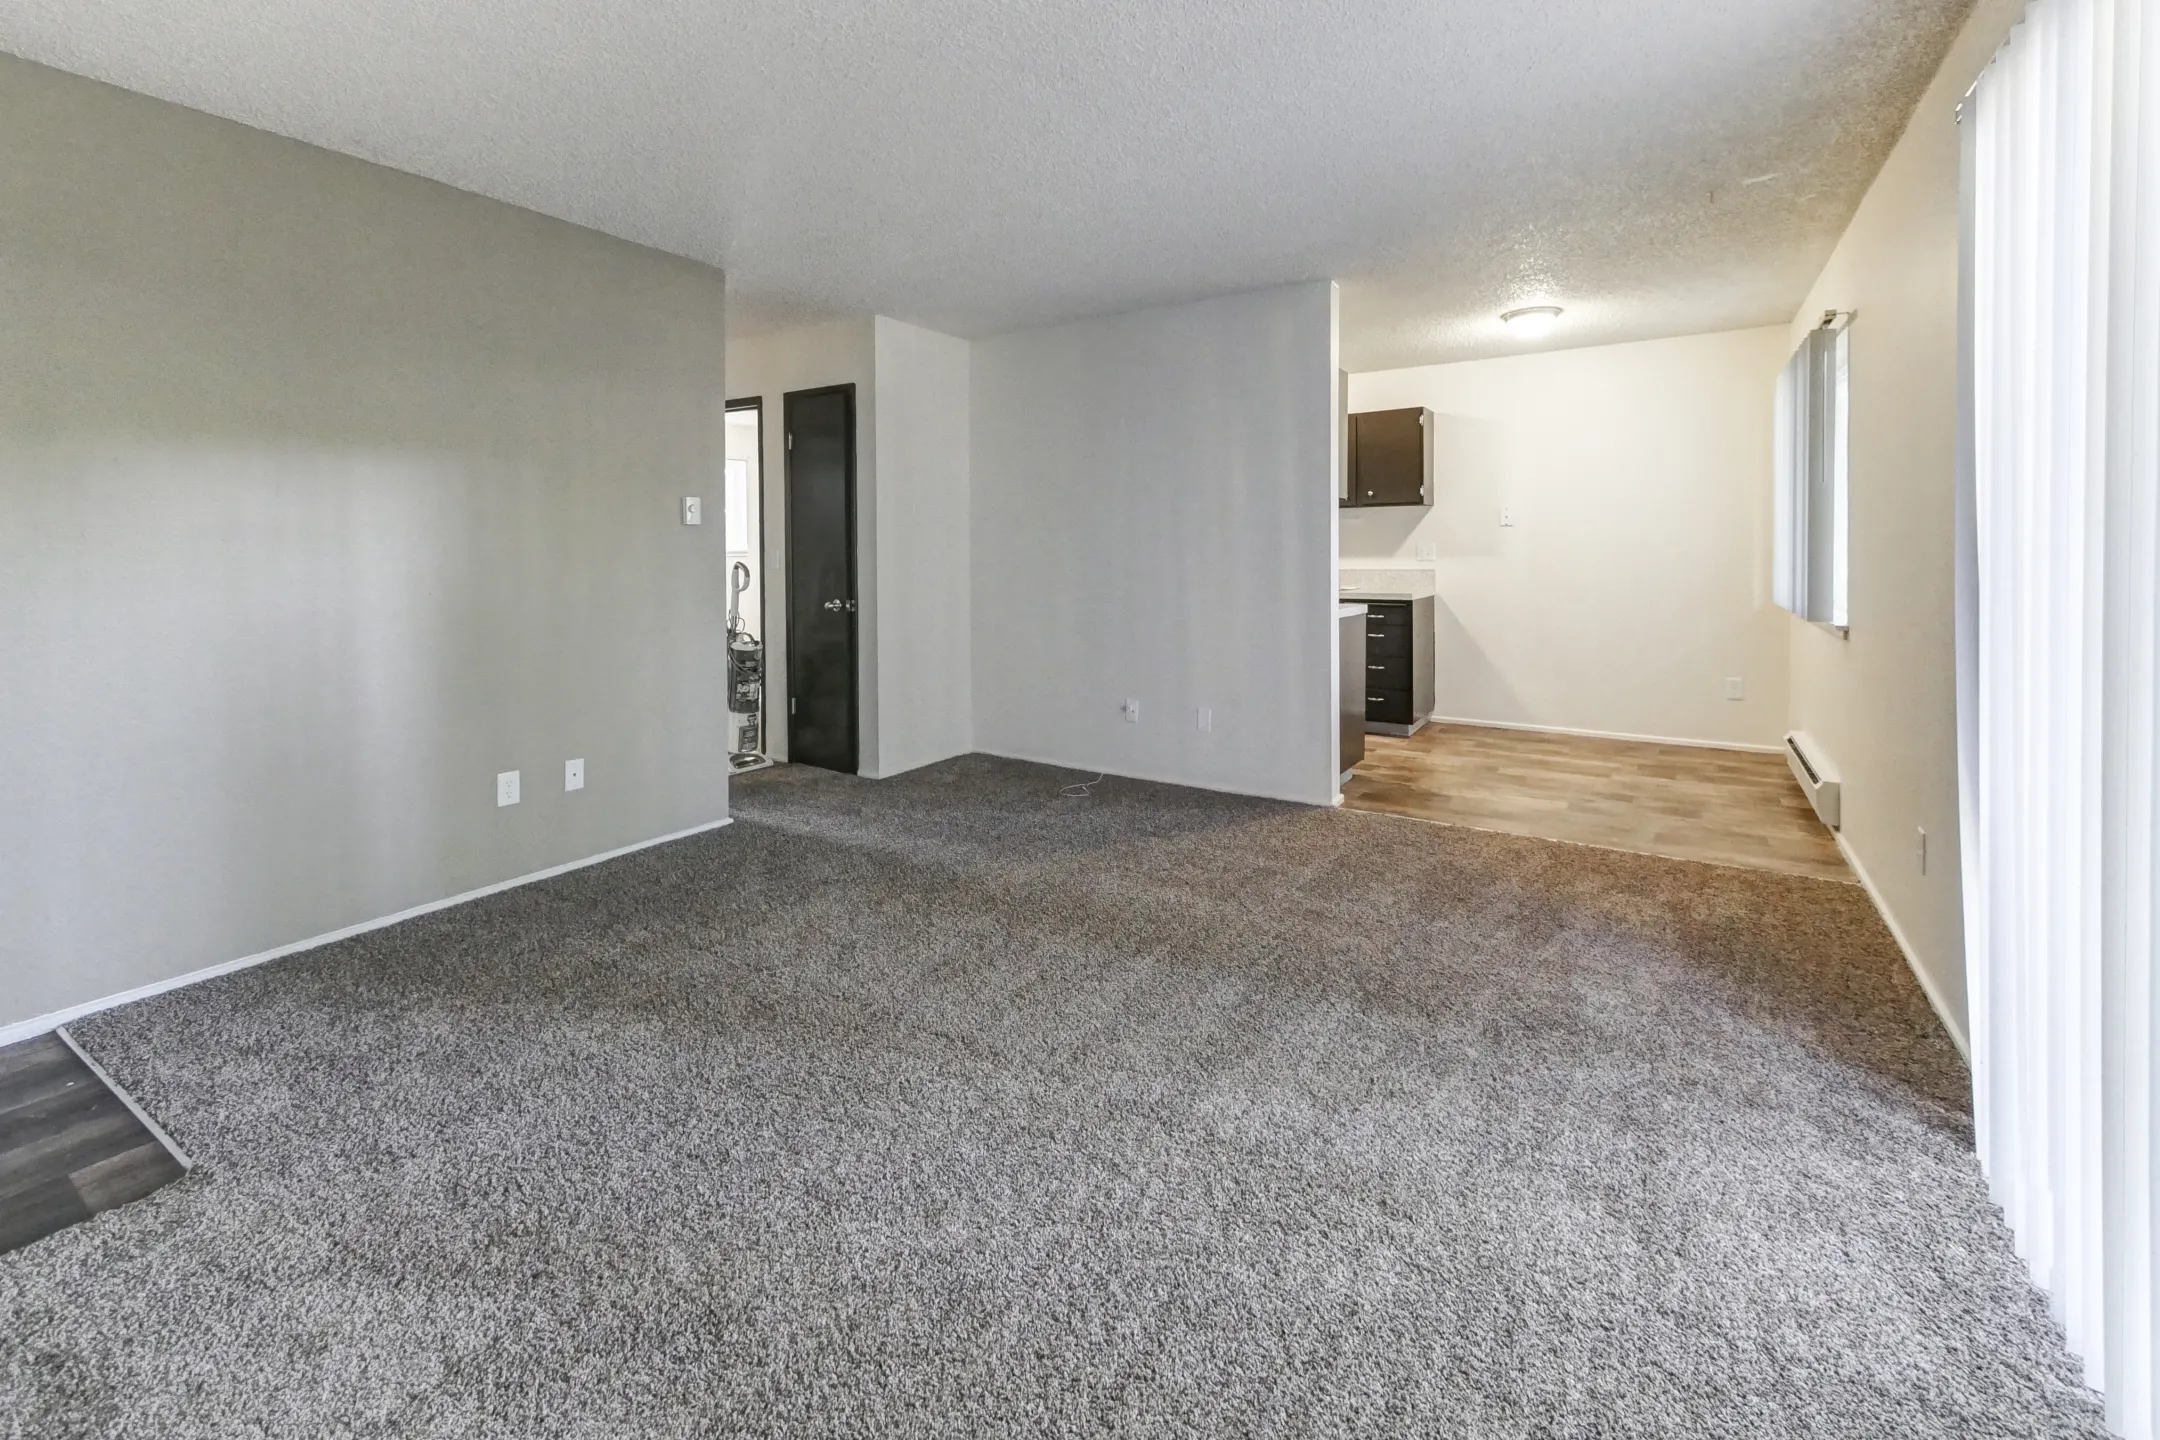 Capitol Club - 3800 14th Ave SE | Lacey, WA Apartments for Rent | Rent.